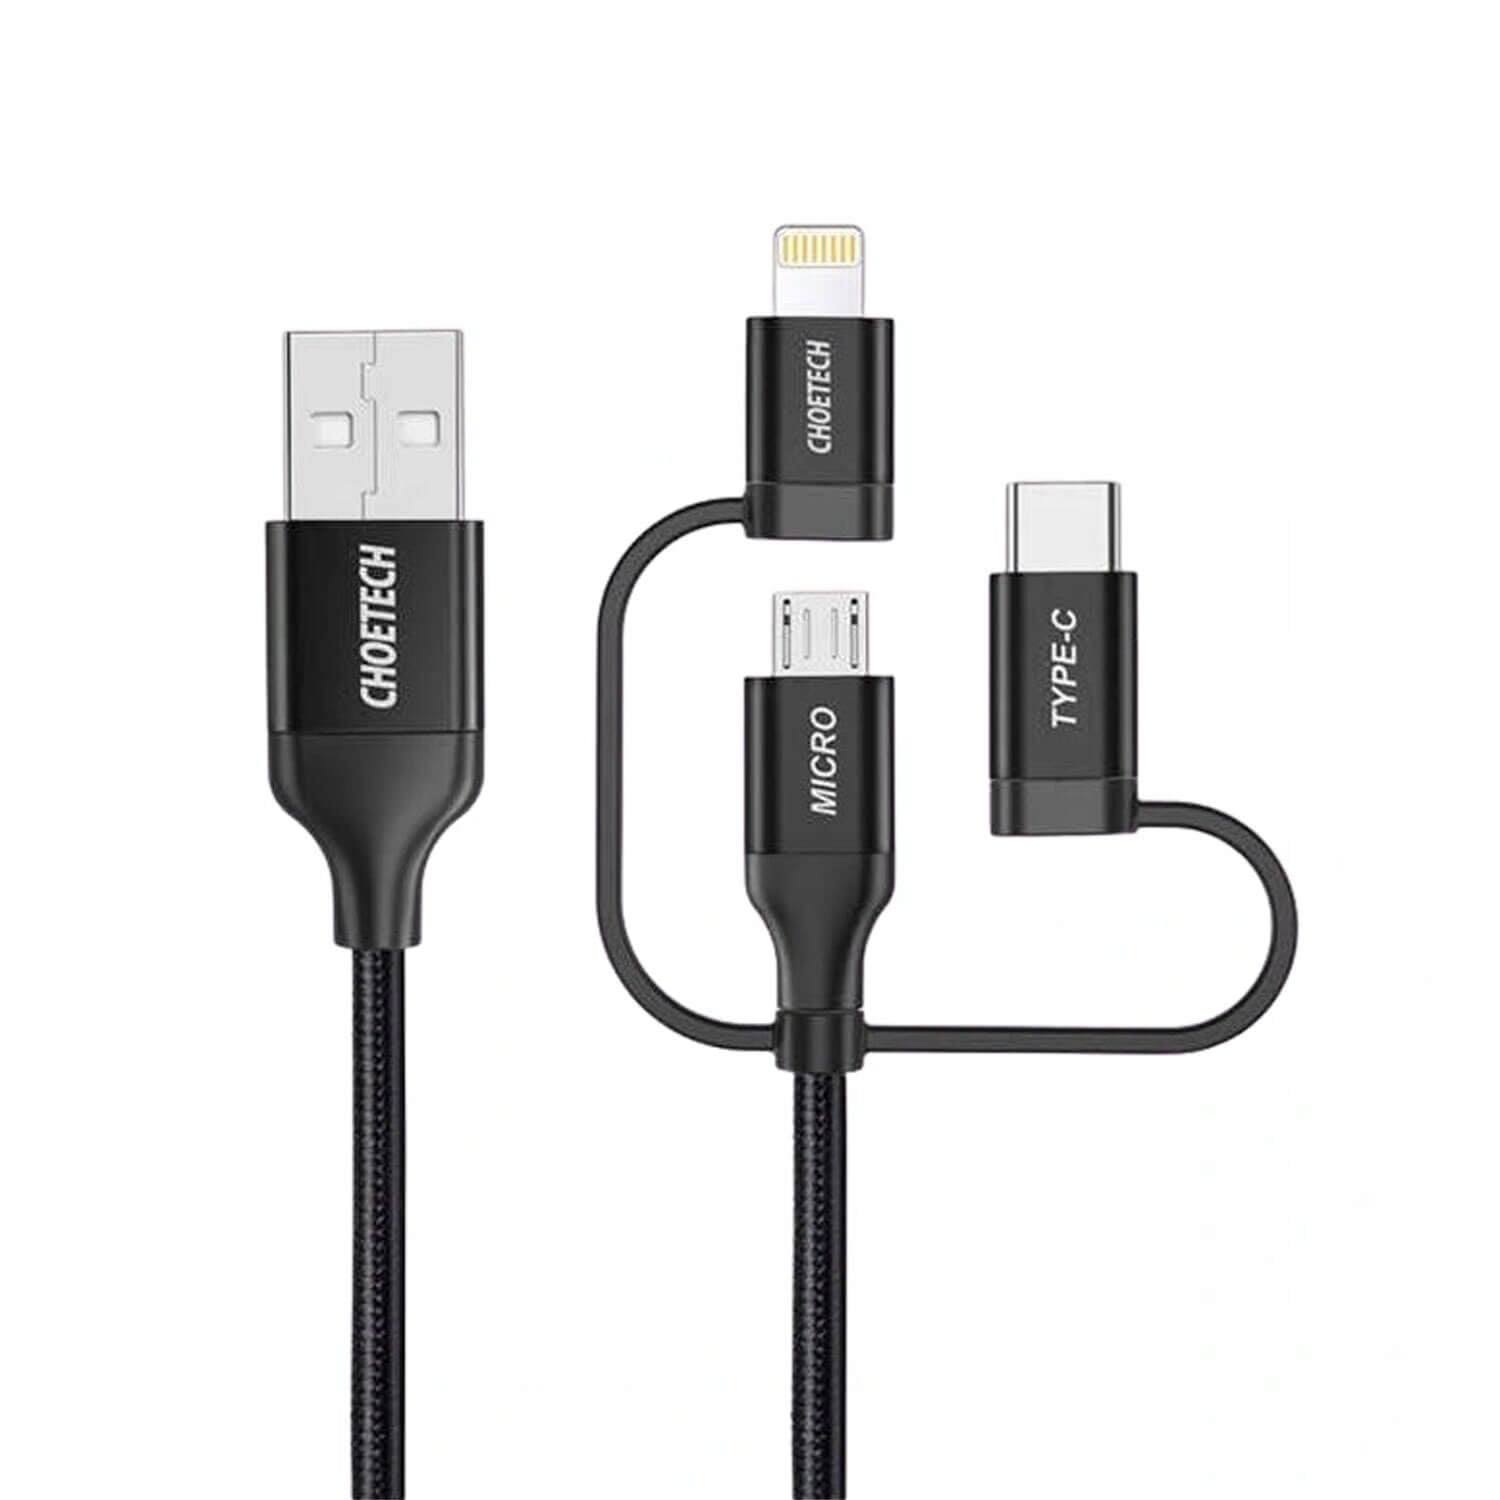 Tough on MFI Certified 3 in 1 Charging Cable Black